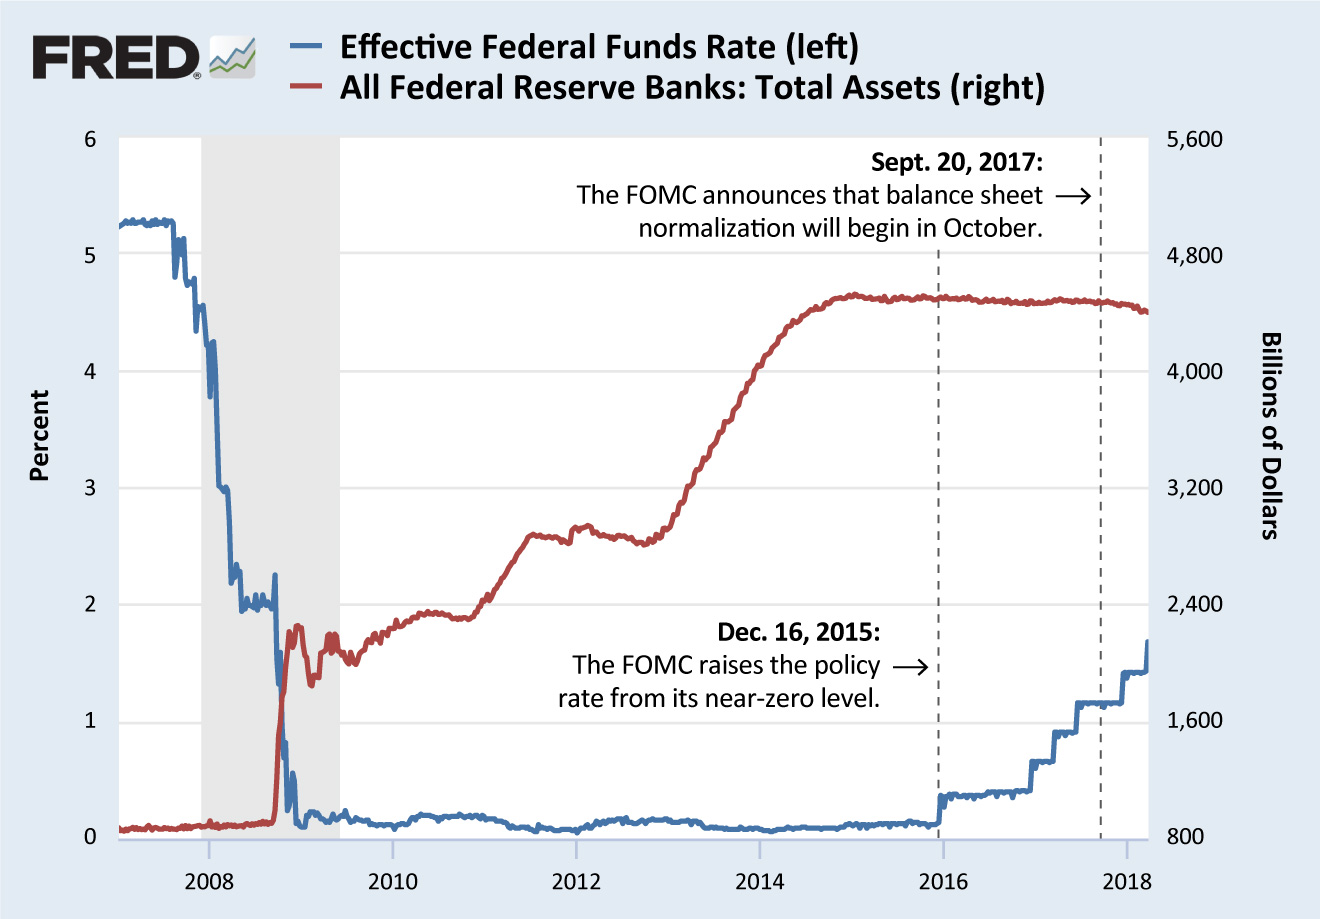 Effective Fed Funds Rate and All Federal Reserve Banks Total Assets